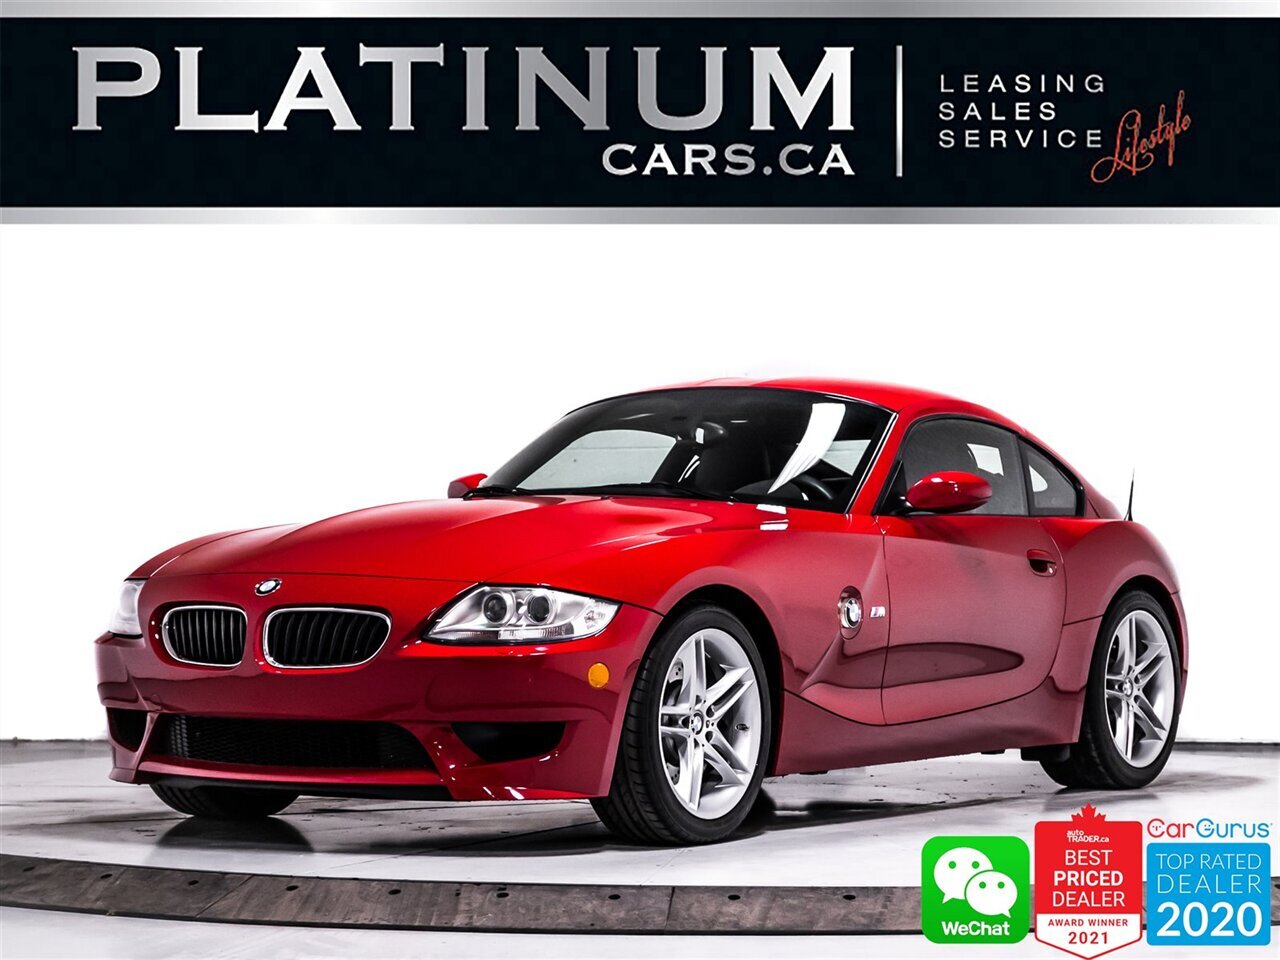 2007 BMW Z4 M COUPE, 330HP, S54 ENGINE, MANUAL, IMOLA RED, NAV